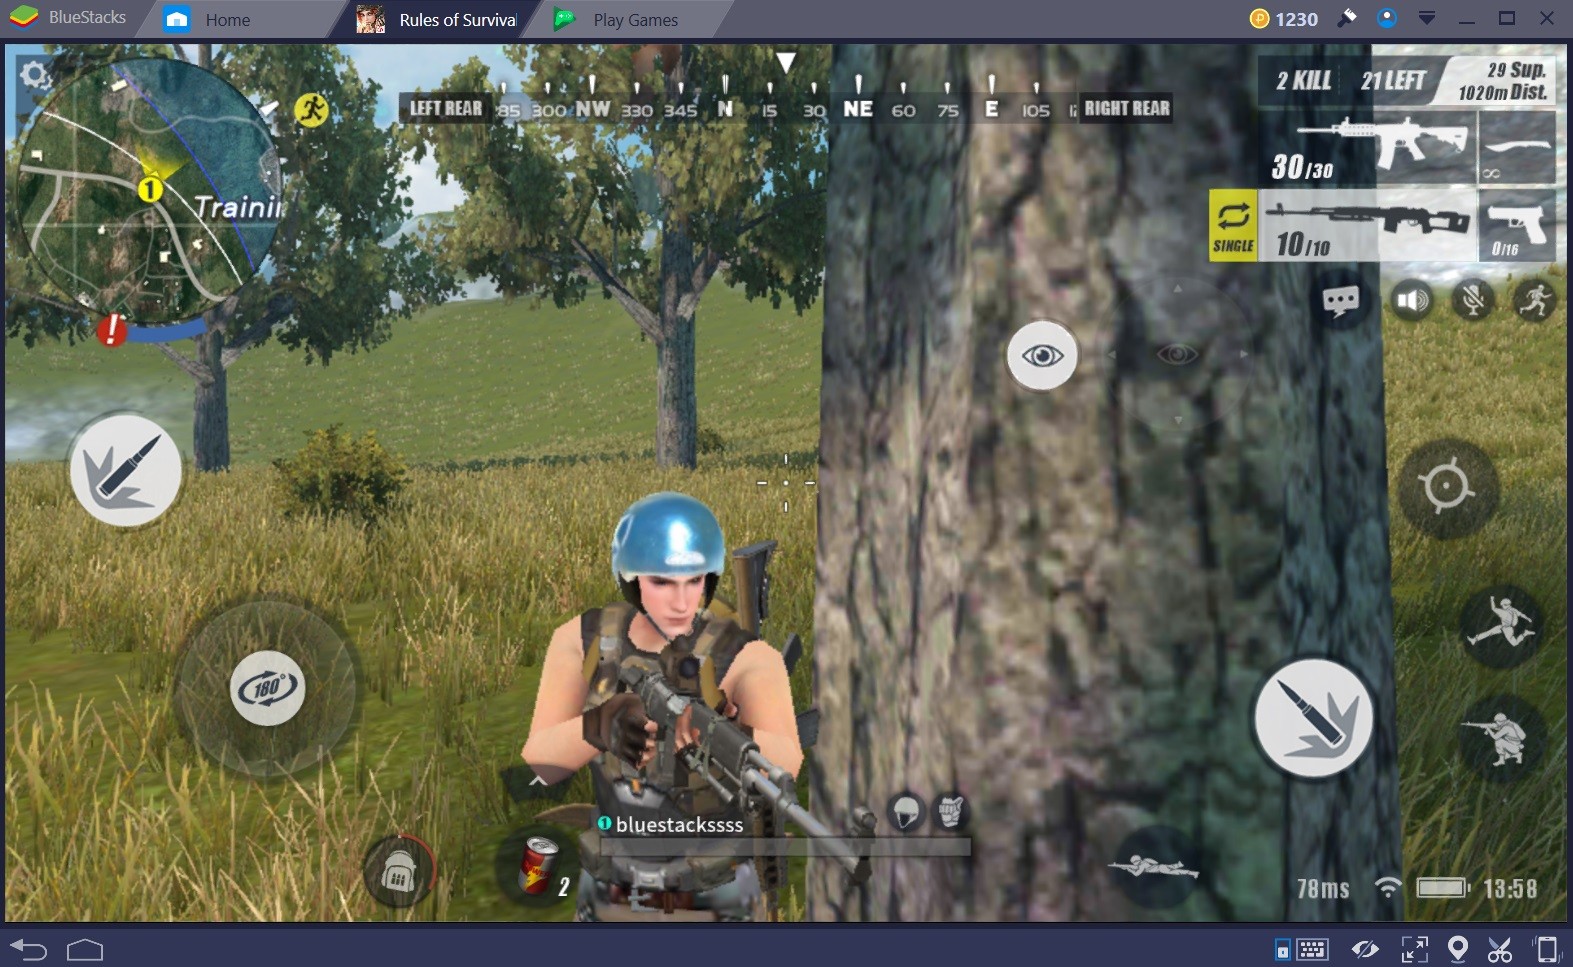 Top Tips For Improving Your Aim When Playing Rules Of Survival - for those that already play on bluestacks here s a good tip for you play in full screen mode if you play in windowed mode you ll be at a disadvantage